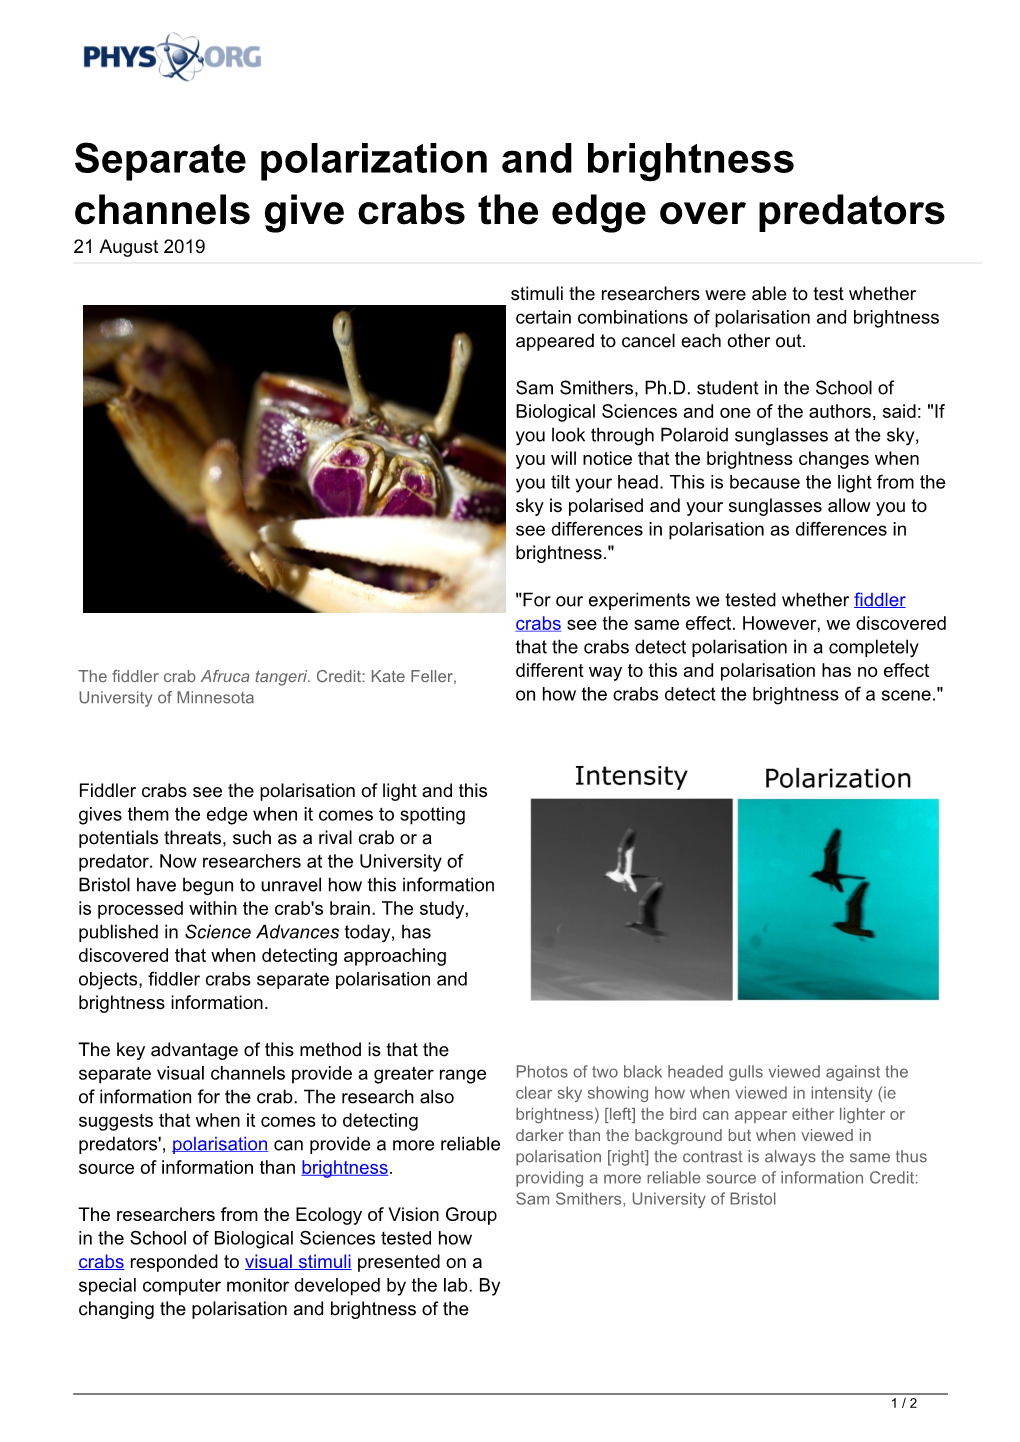 Separate Polarization and Brightness Channels Give Crabs the Edge Over Predators 21 August 2019